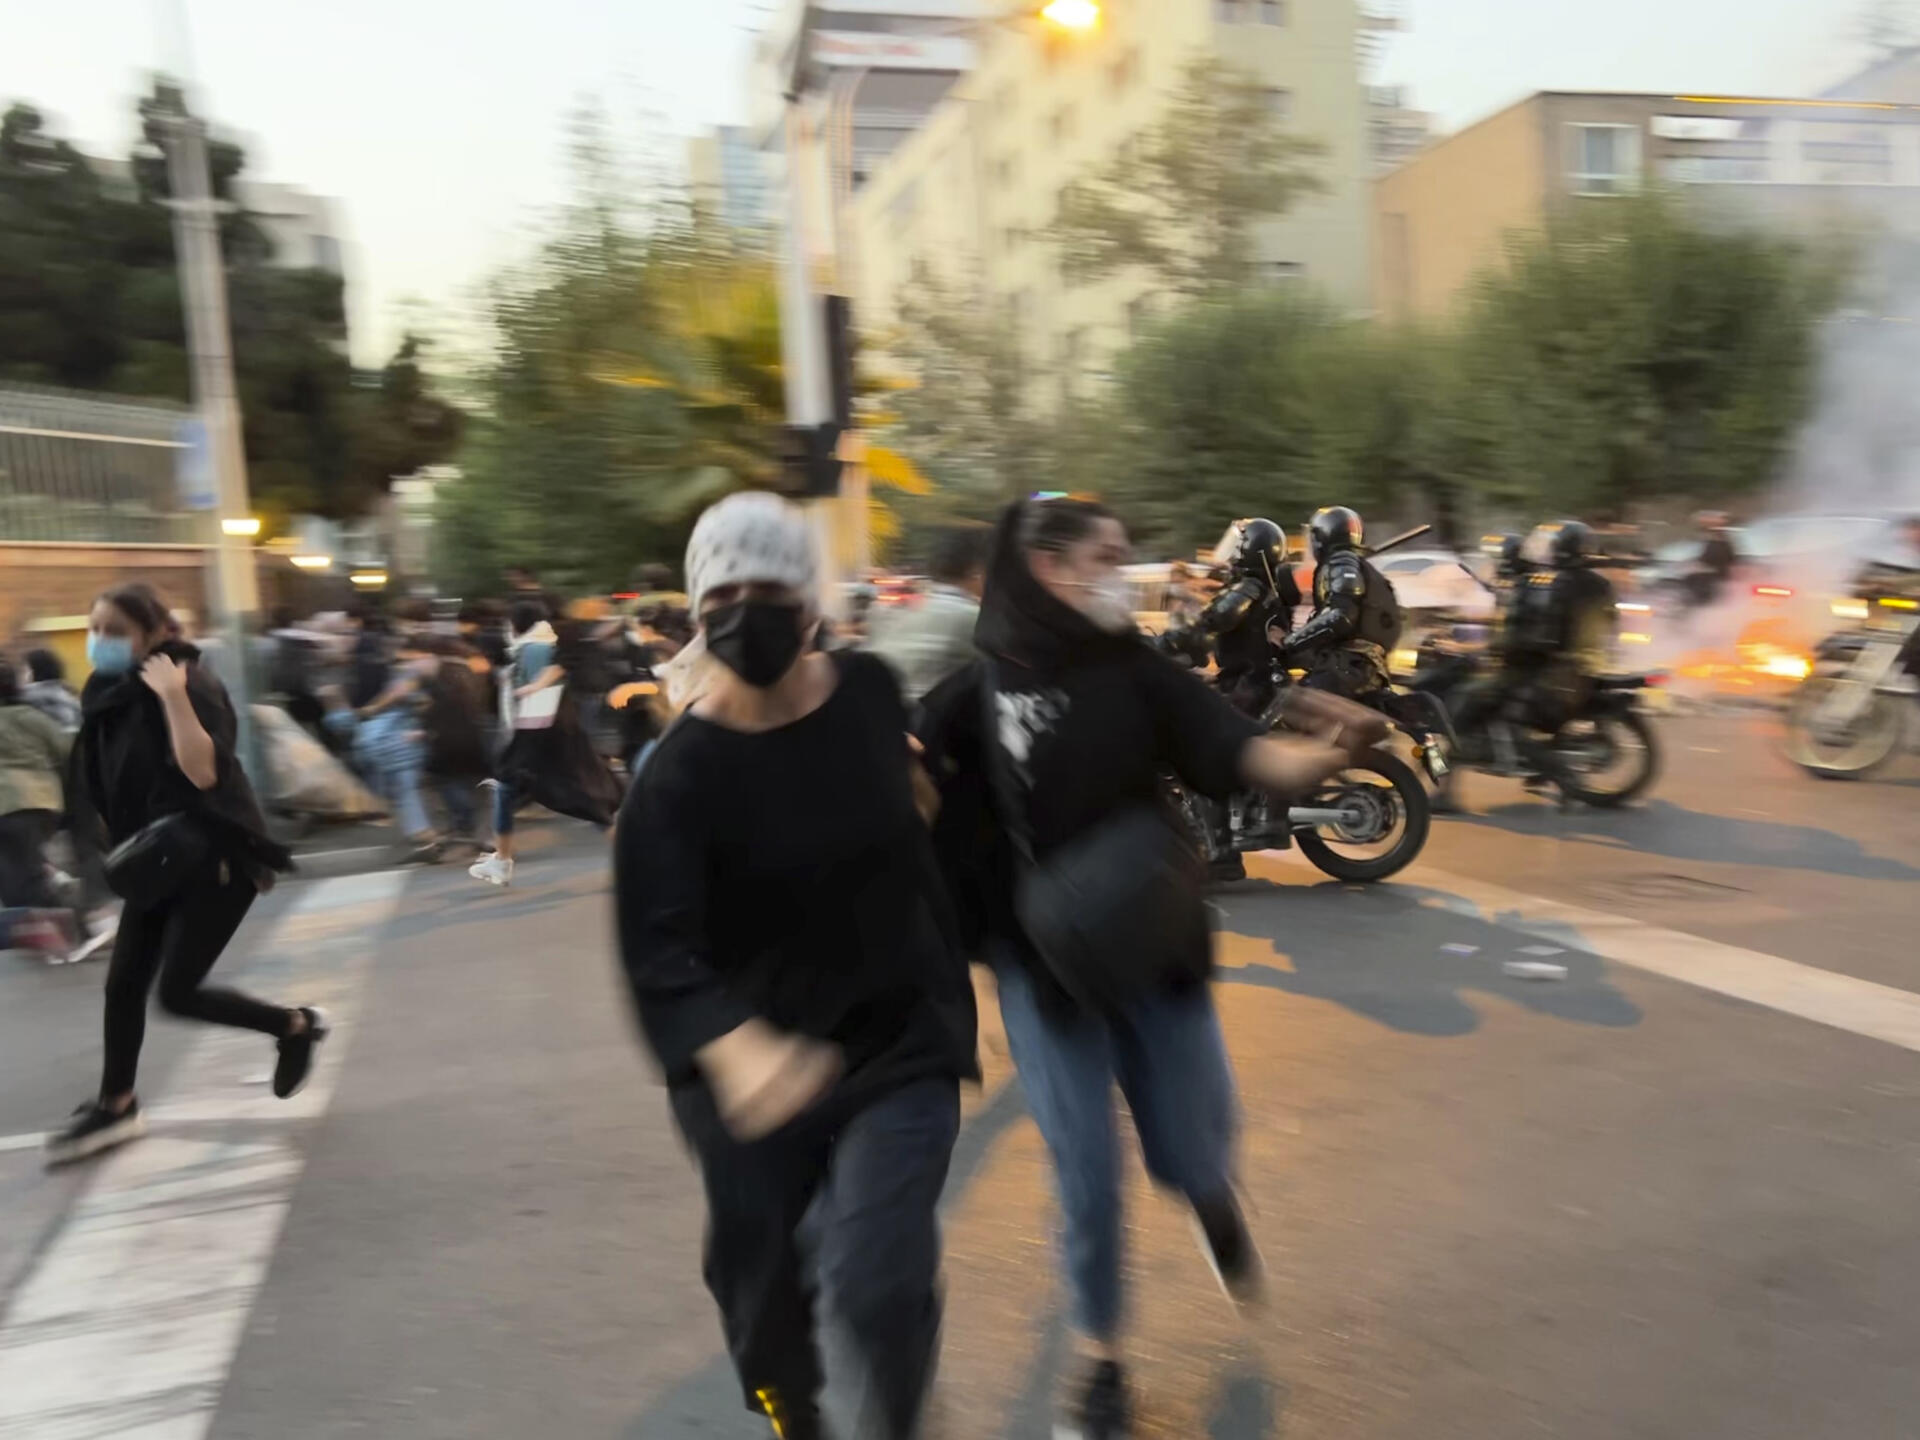 Intervention of riot police during the demonstration against the death of Mahsa Amini, in Tehran, Iran, September 19, 2022.